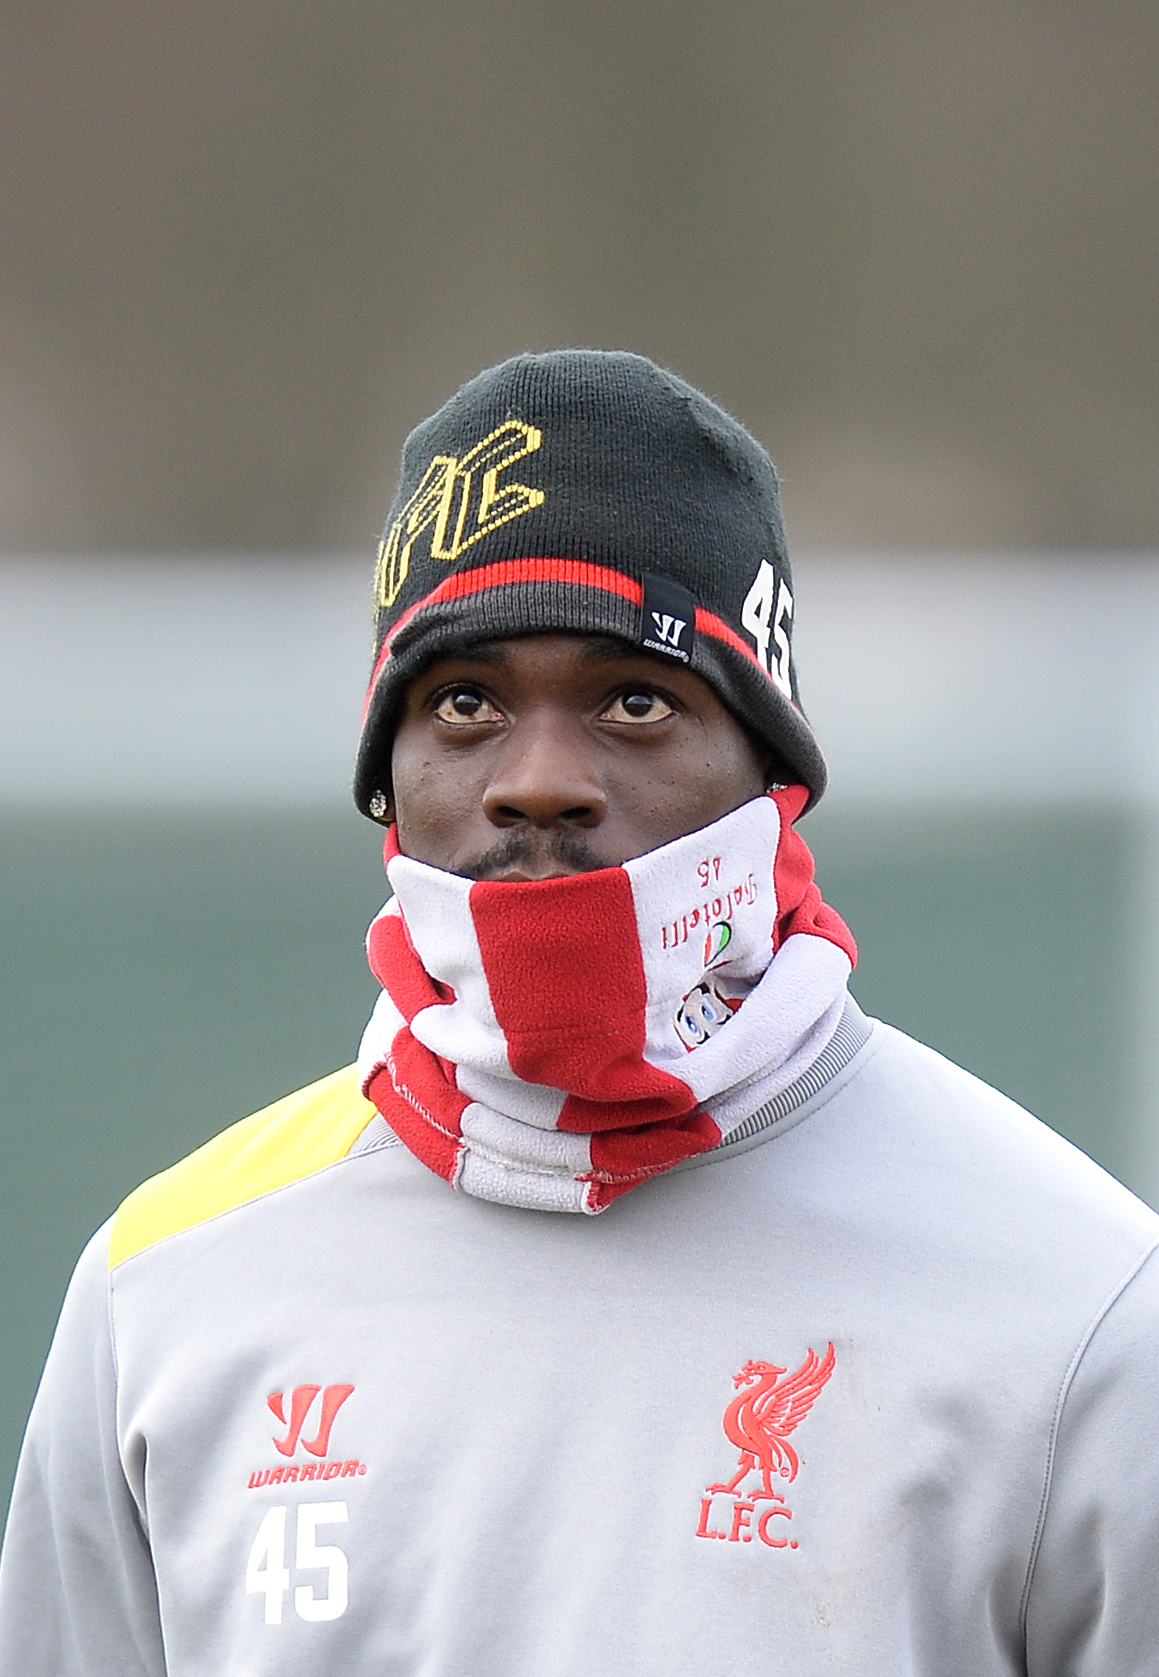 Liverpool’s Mario Balotelli was charged after posting an offensive message